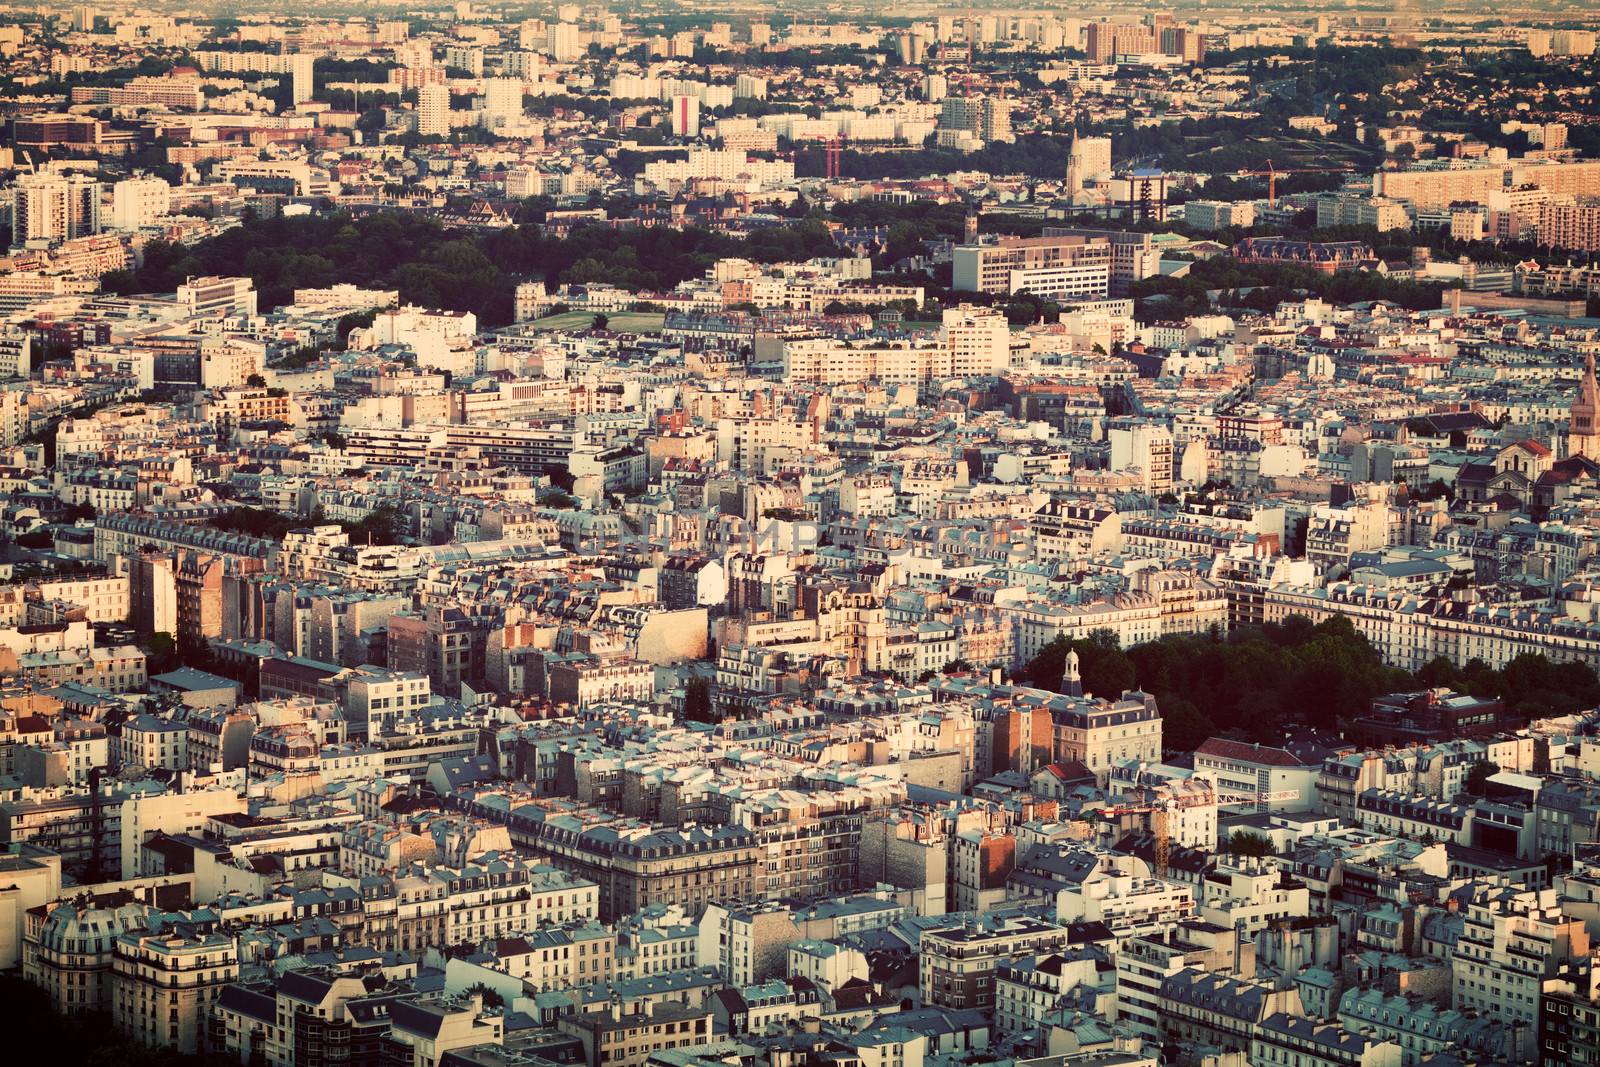 Paris, France view from the top on a residential district, block of flats. Vintage style